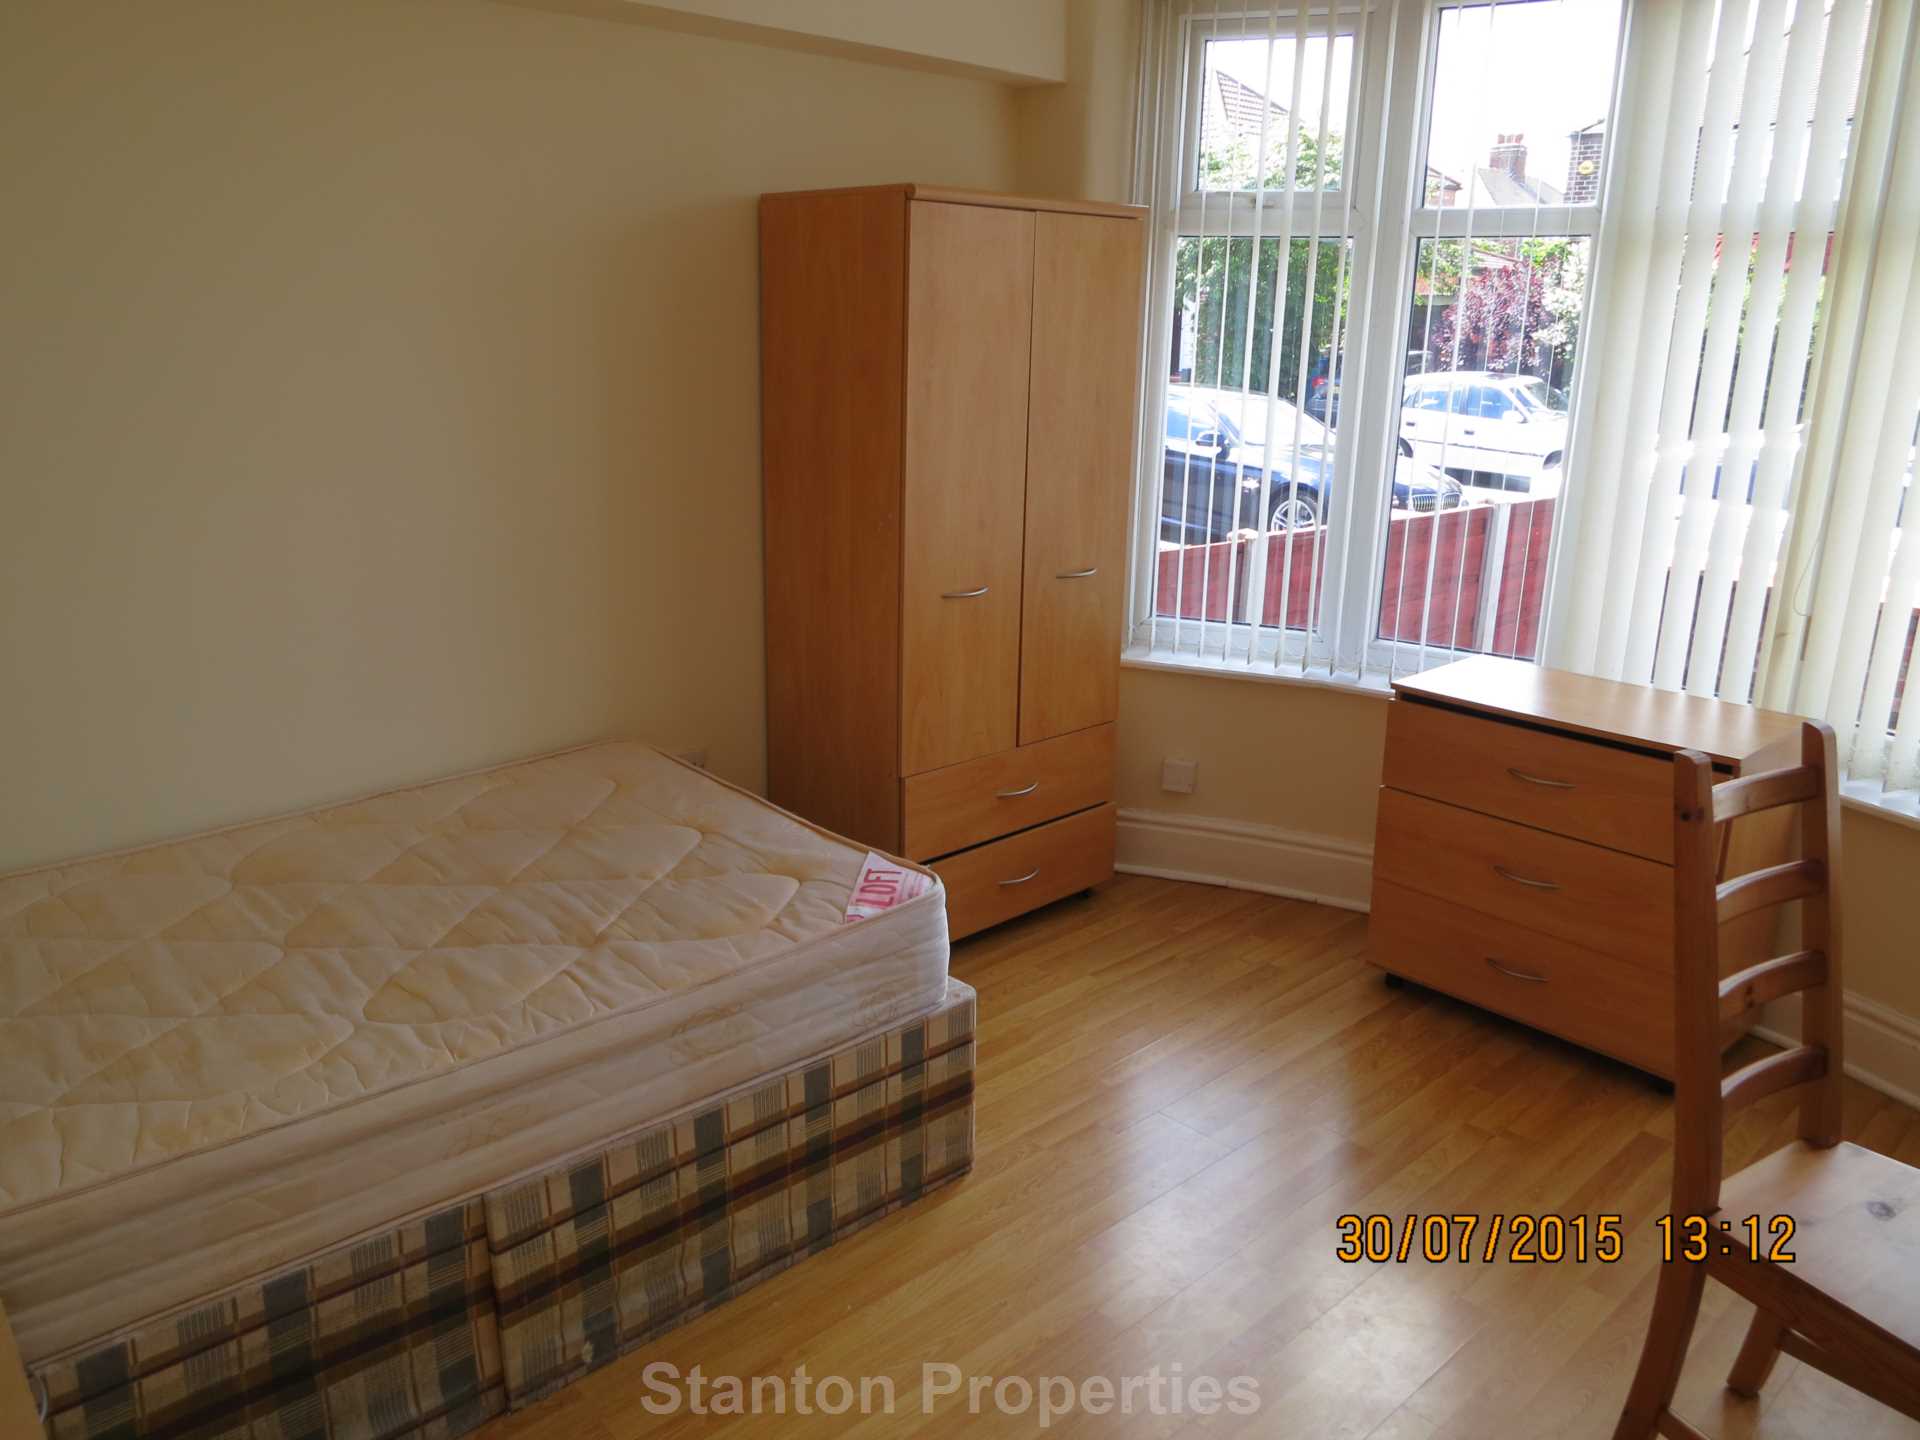 £120 pppw, Weld Road, Withington, Image 13